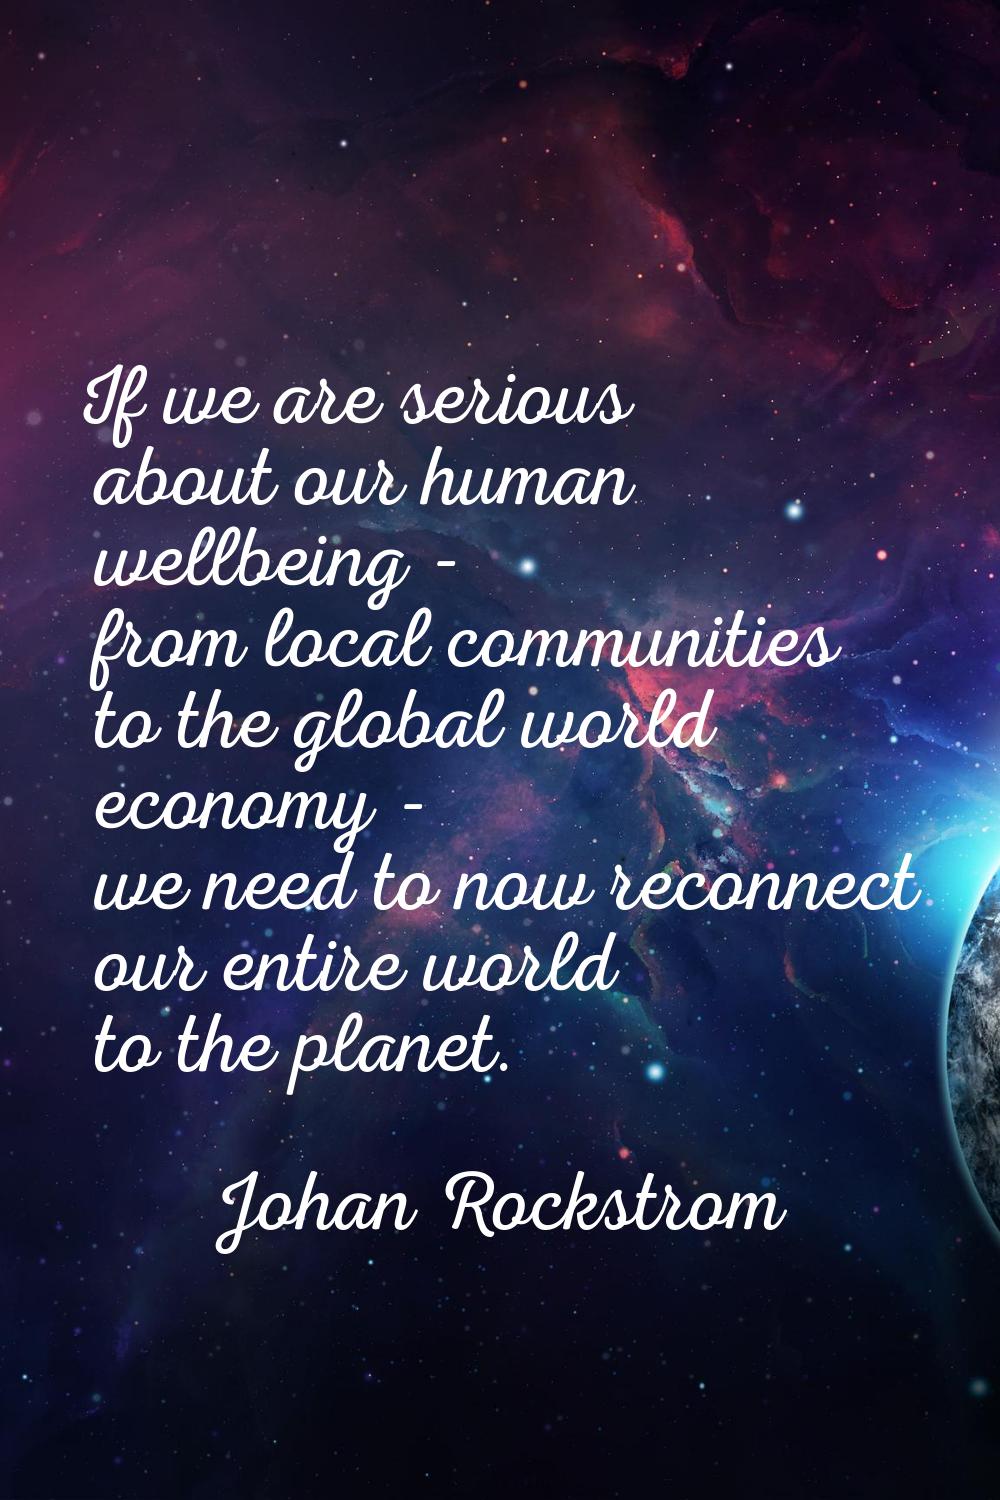 If we are serious about our human wellbeing - from local communities to the global world economy - 